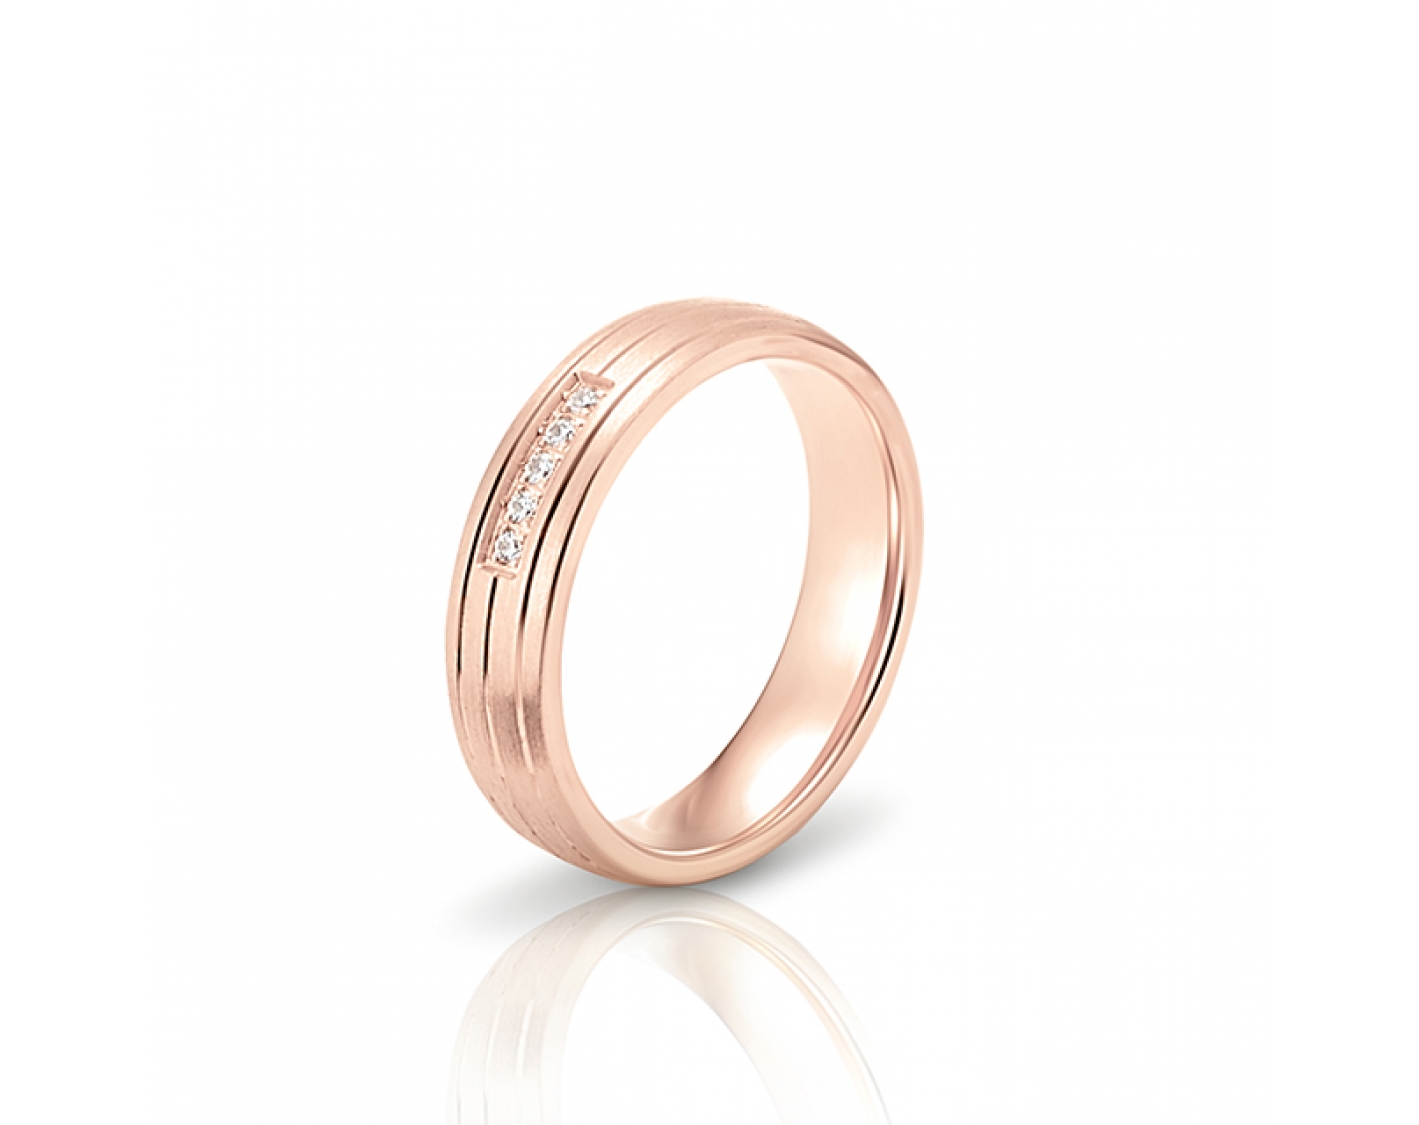 18k rose gold 5mm matte wedding band with shiny inlays and diamonds